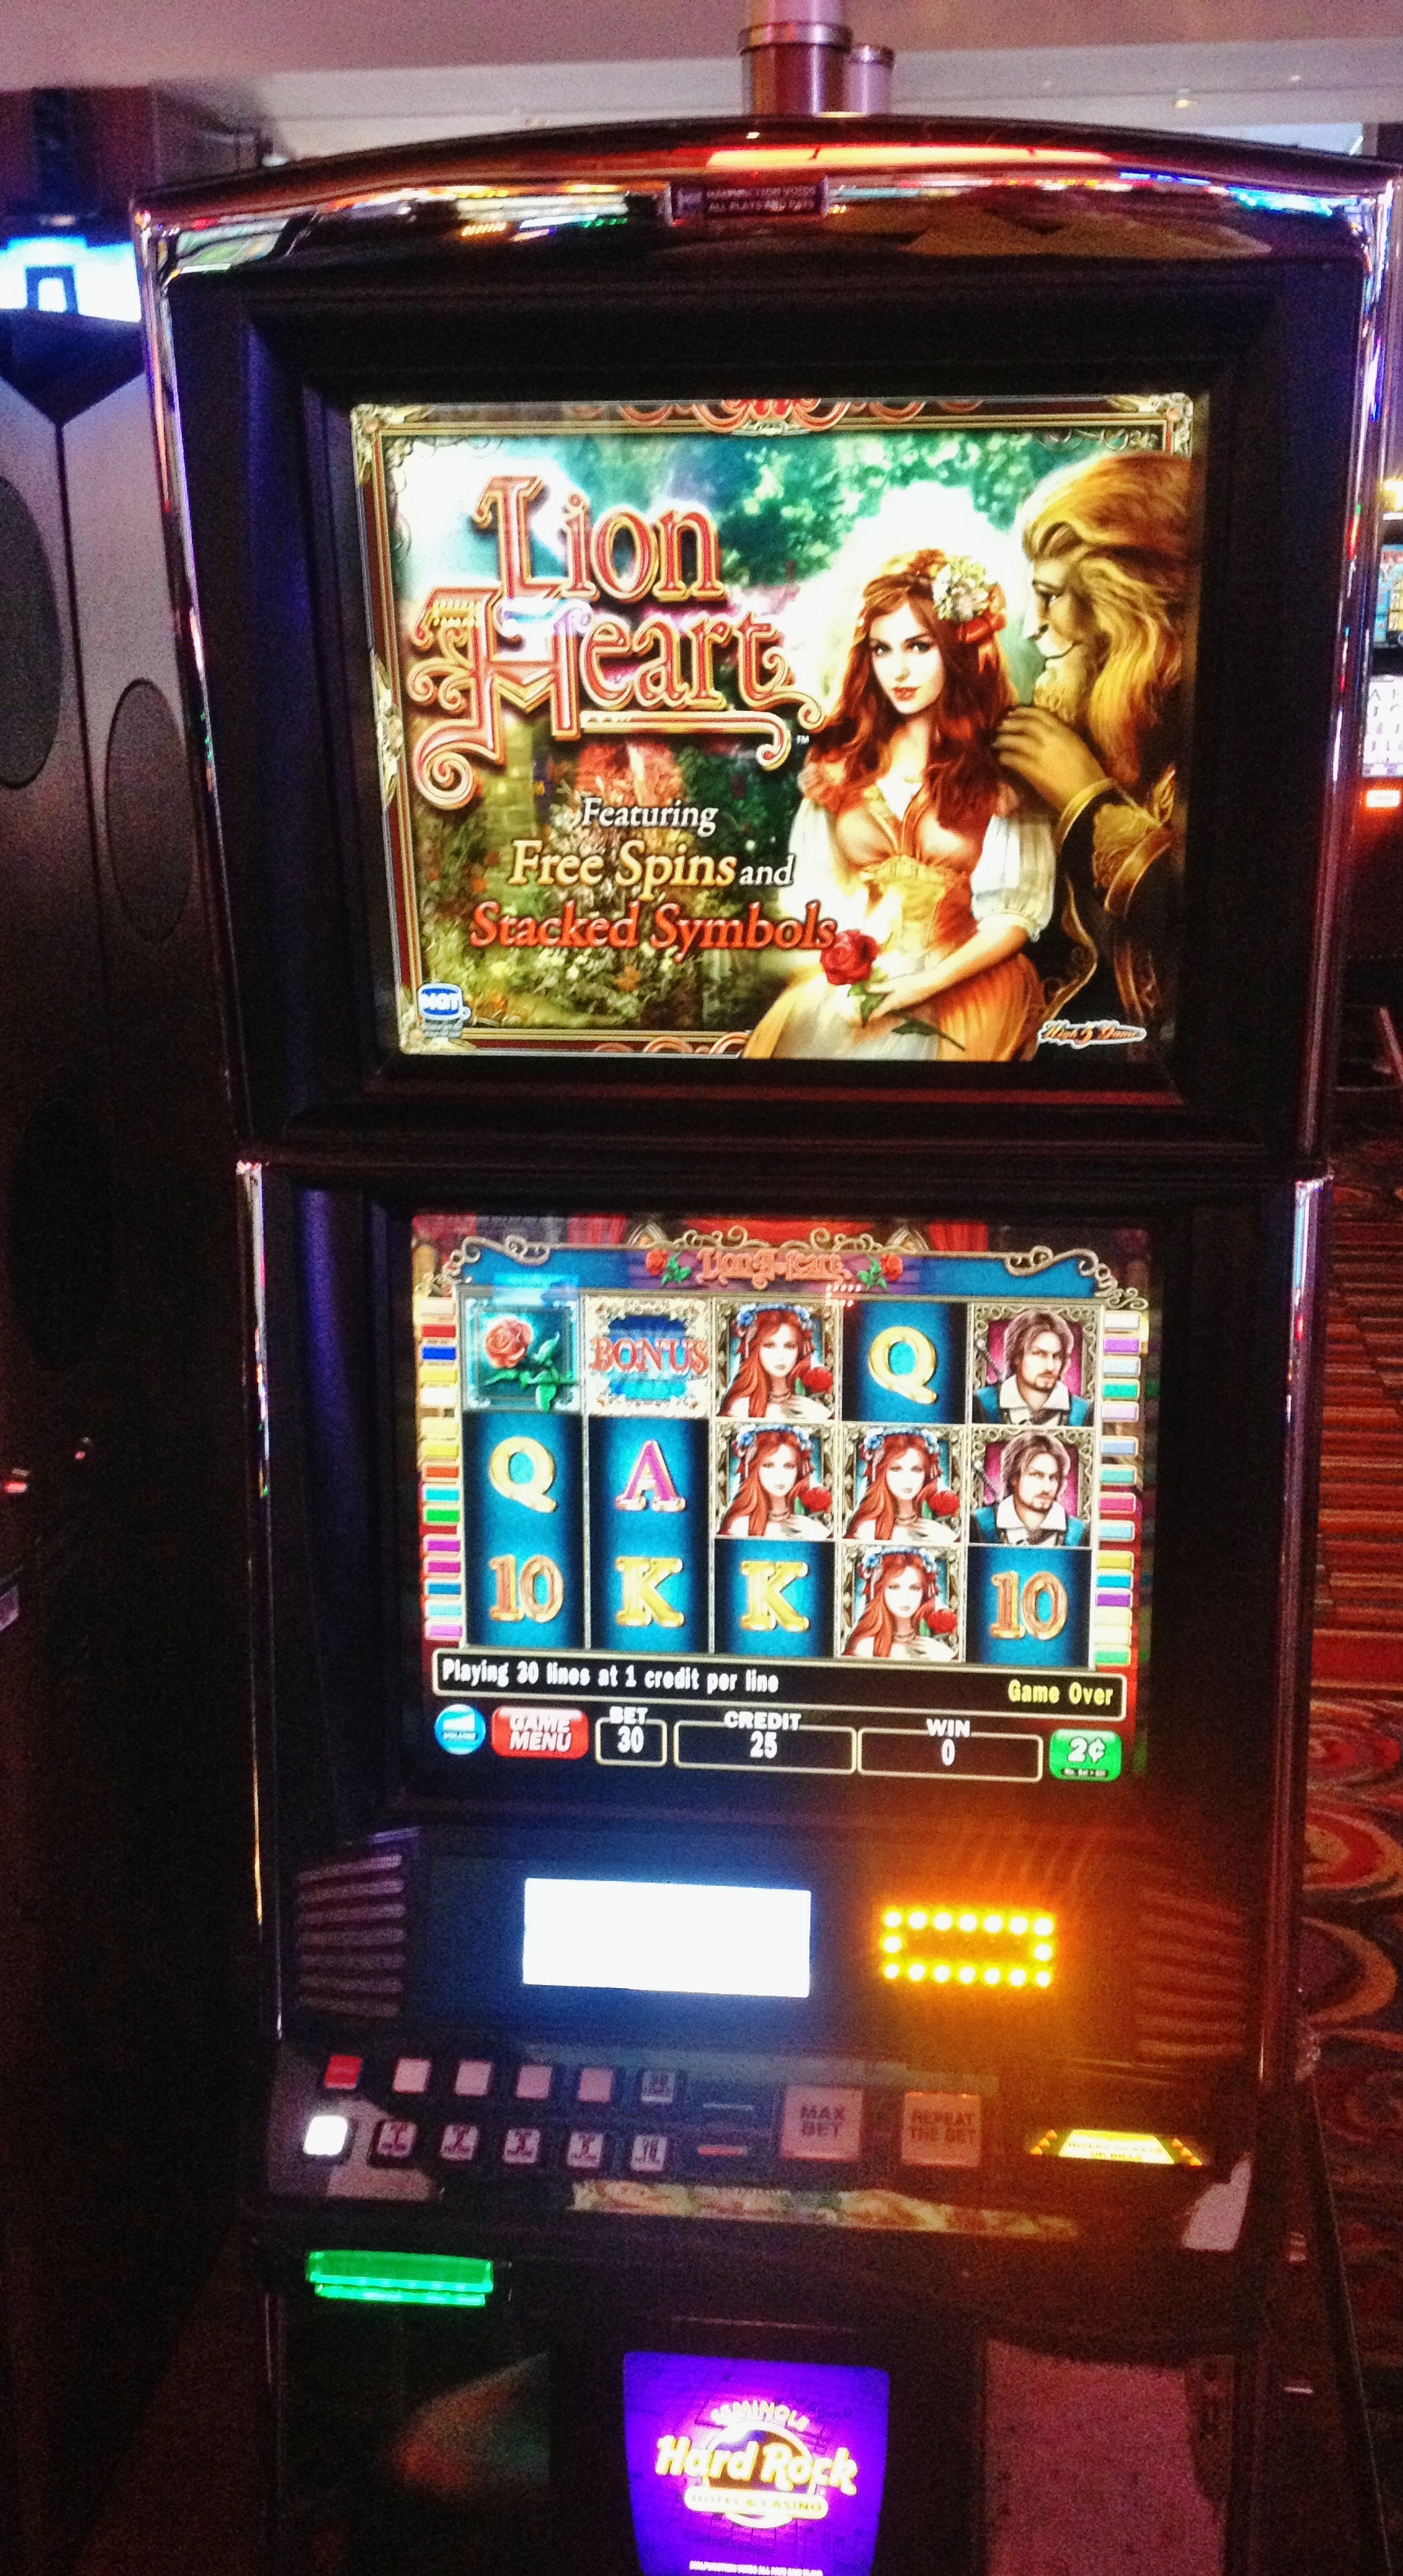 Are digital slot machines rigged odds